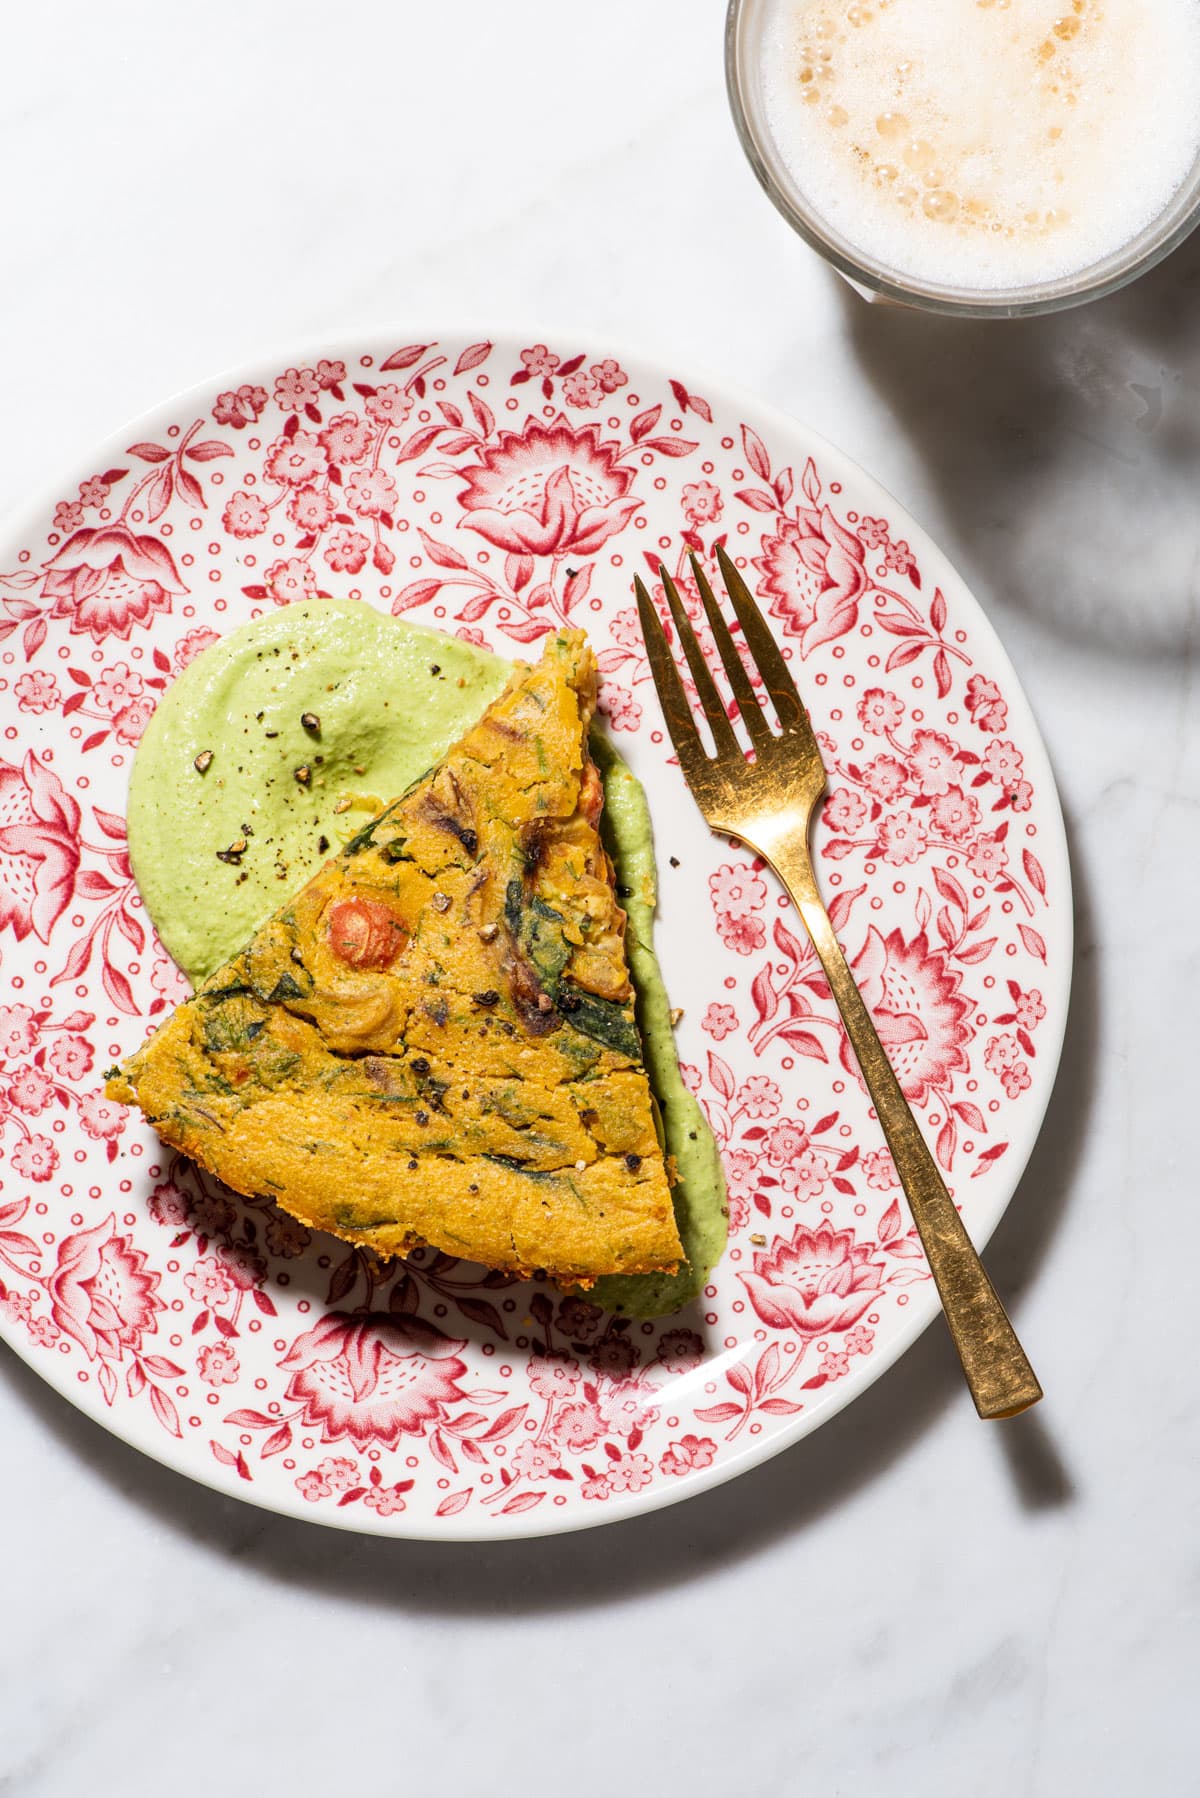 Slice of chickpea flour-based vegan frittata on a floral plate with cilantro cashew cream, next to a latte.